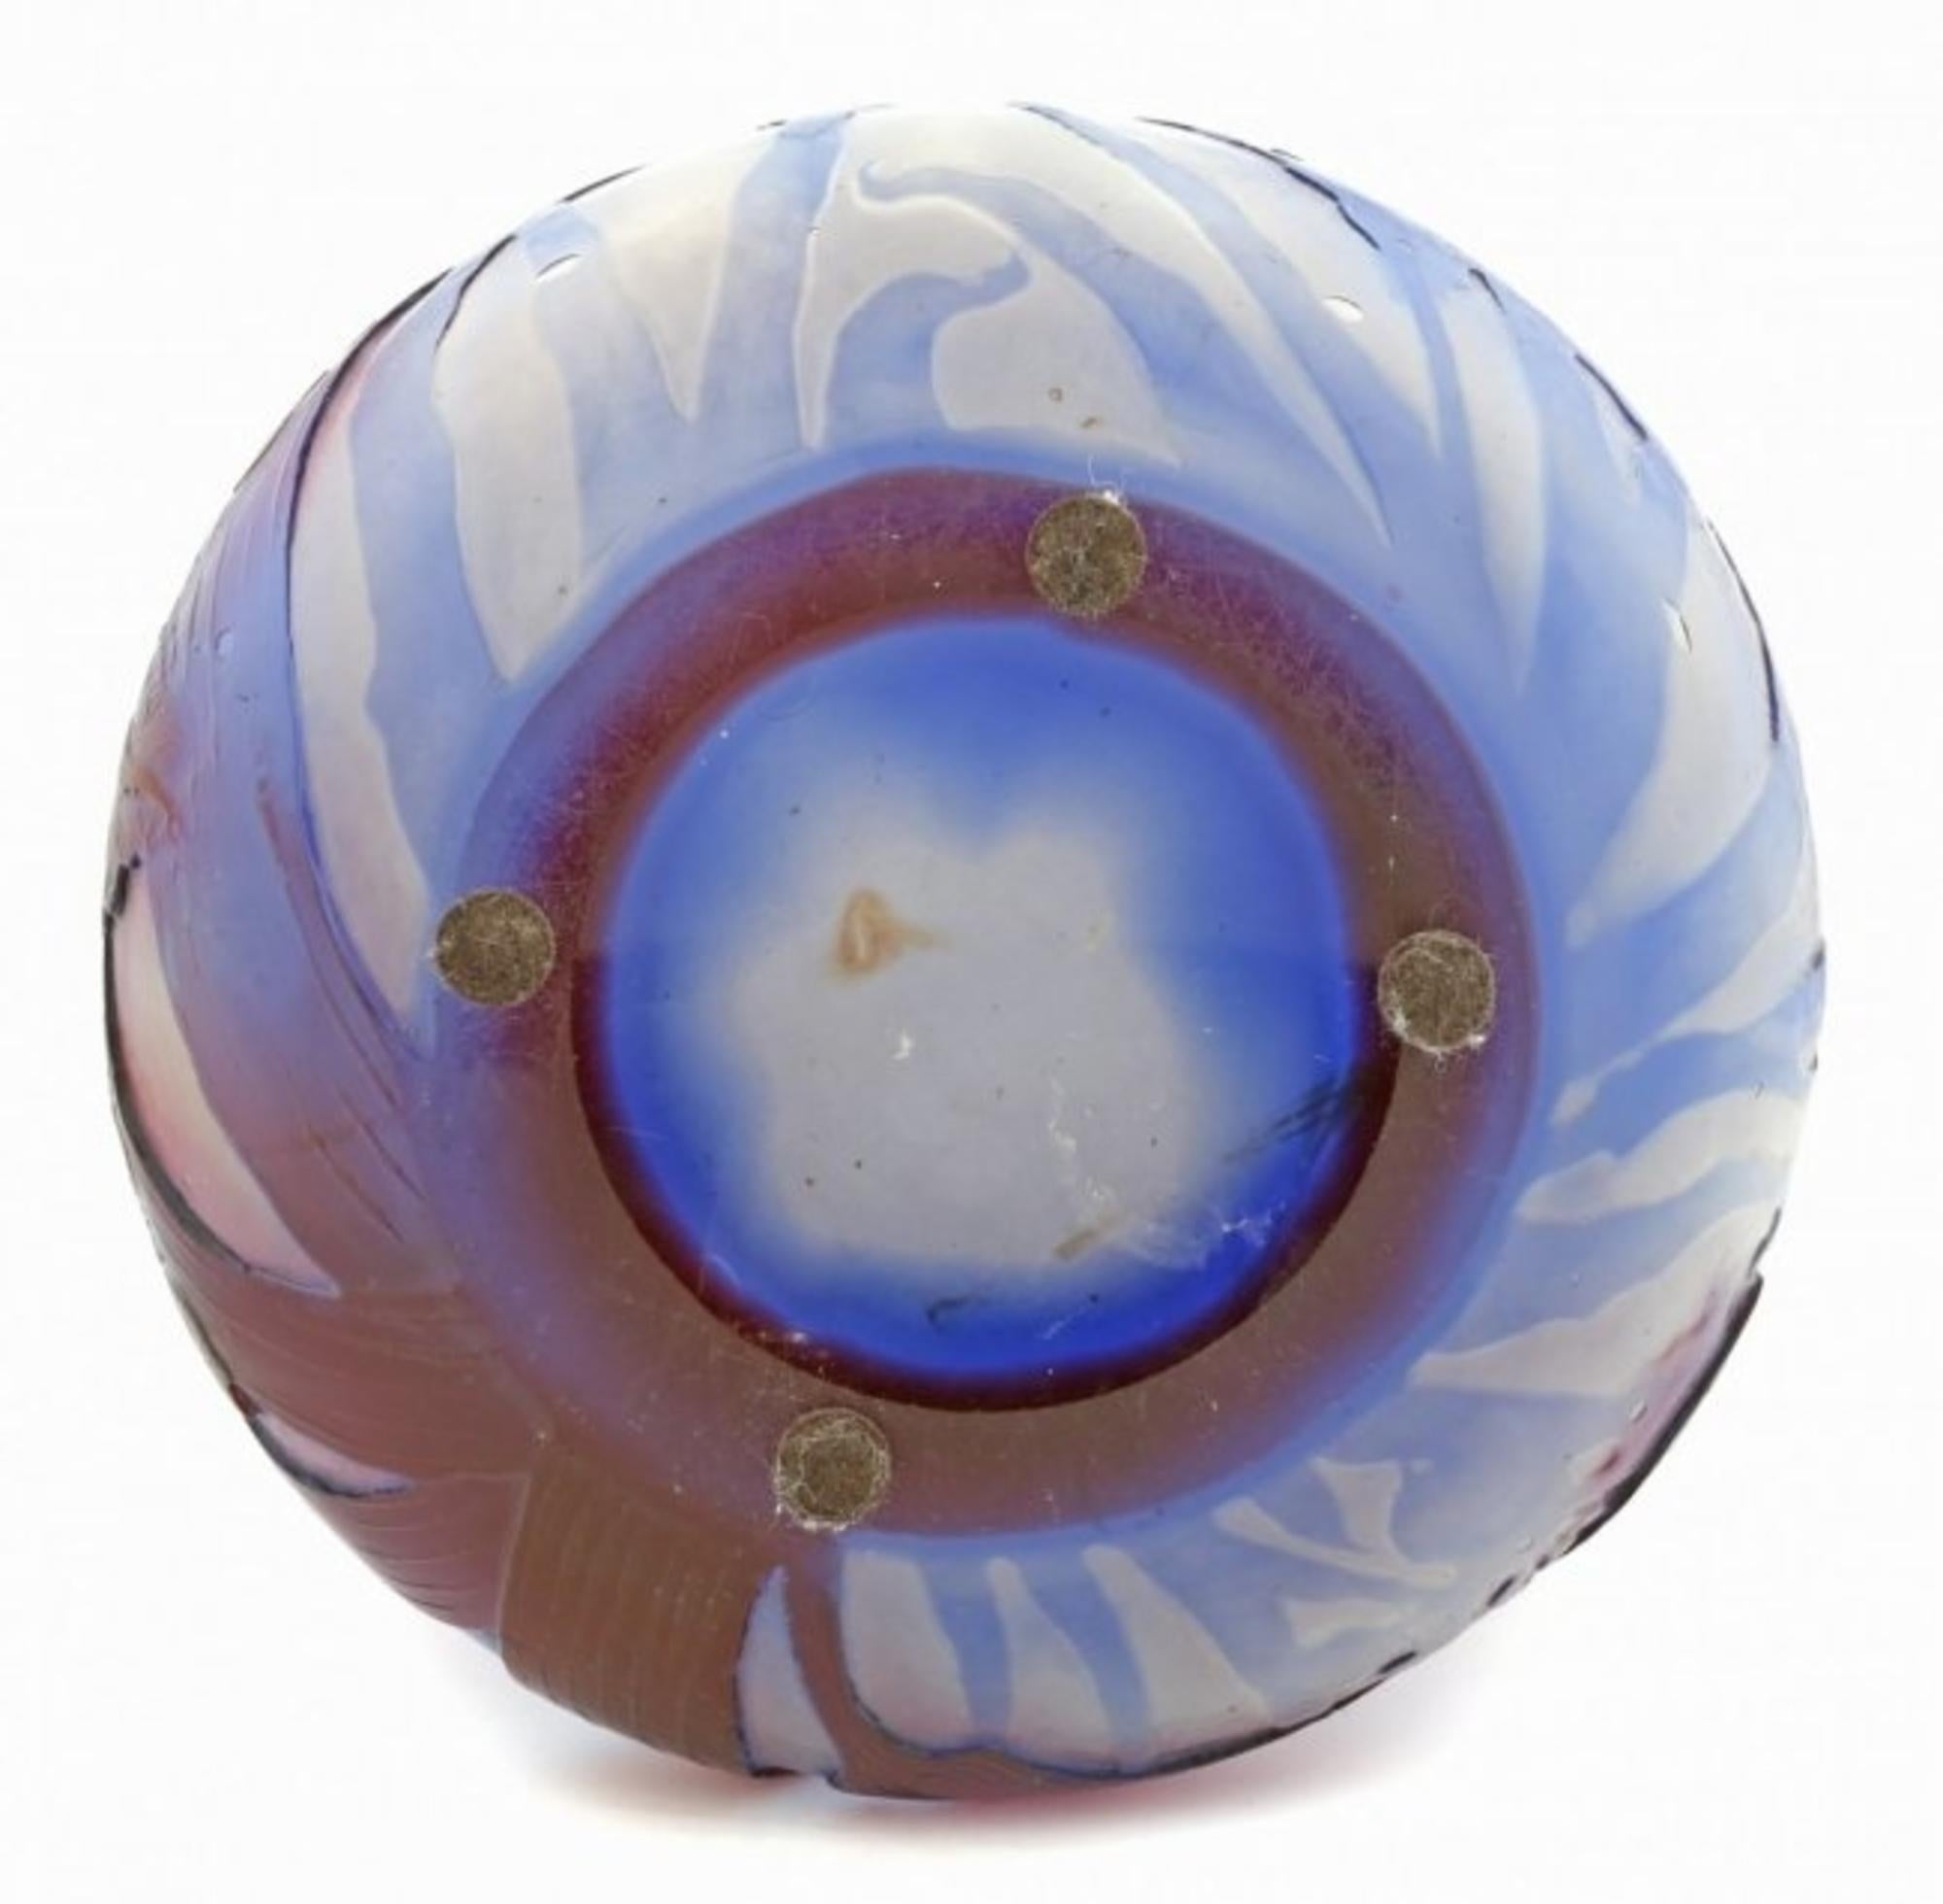 Early 20th Century Fine Wheel-Cut and Fire-Polished Cameo Glass Vase, 'Flowers', Signed Gallé For Sale